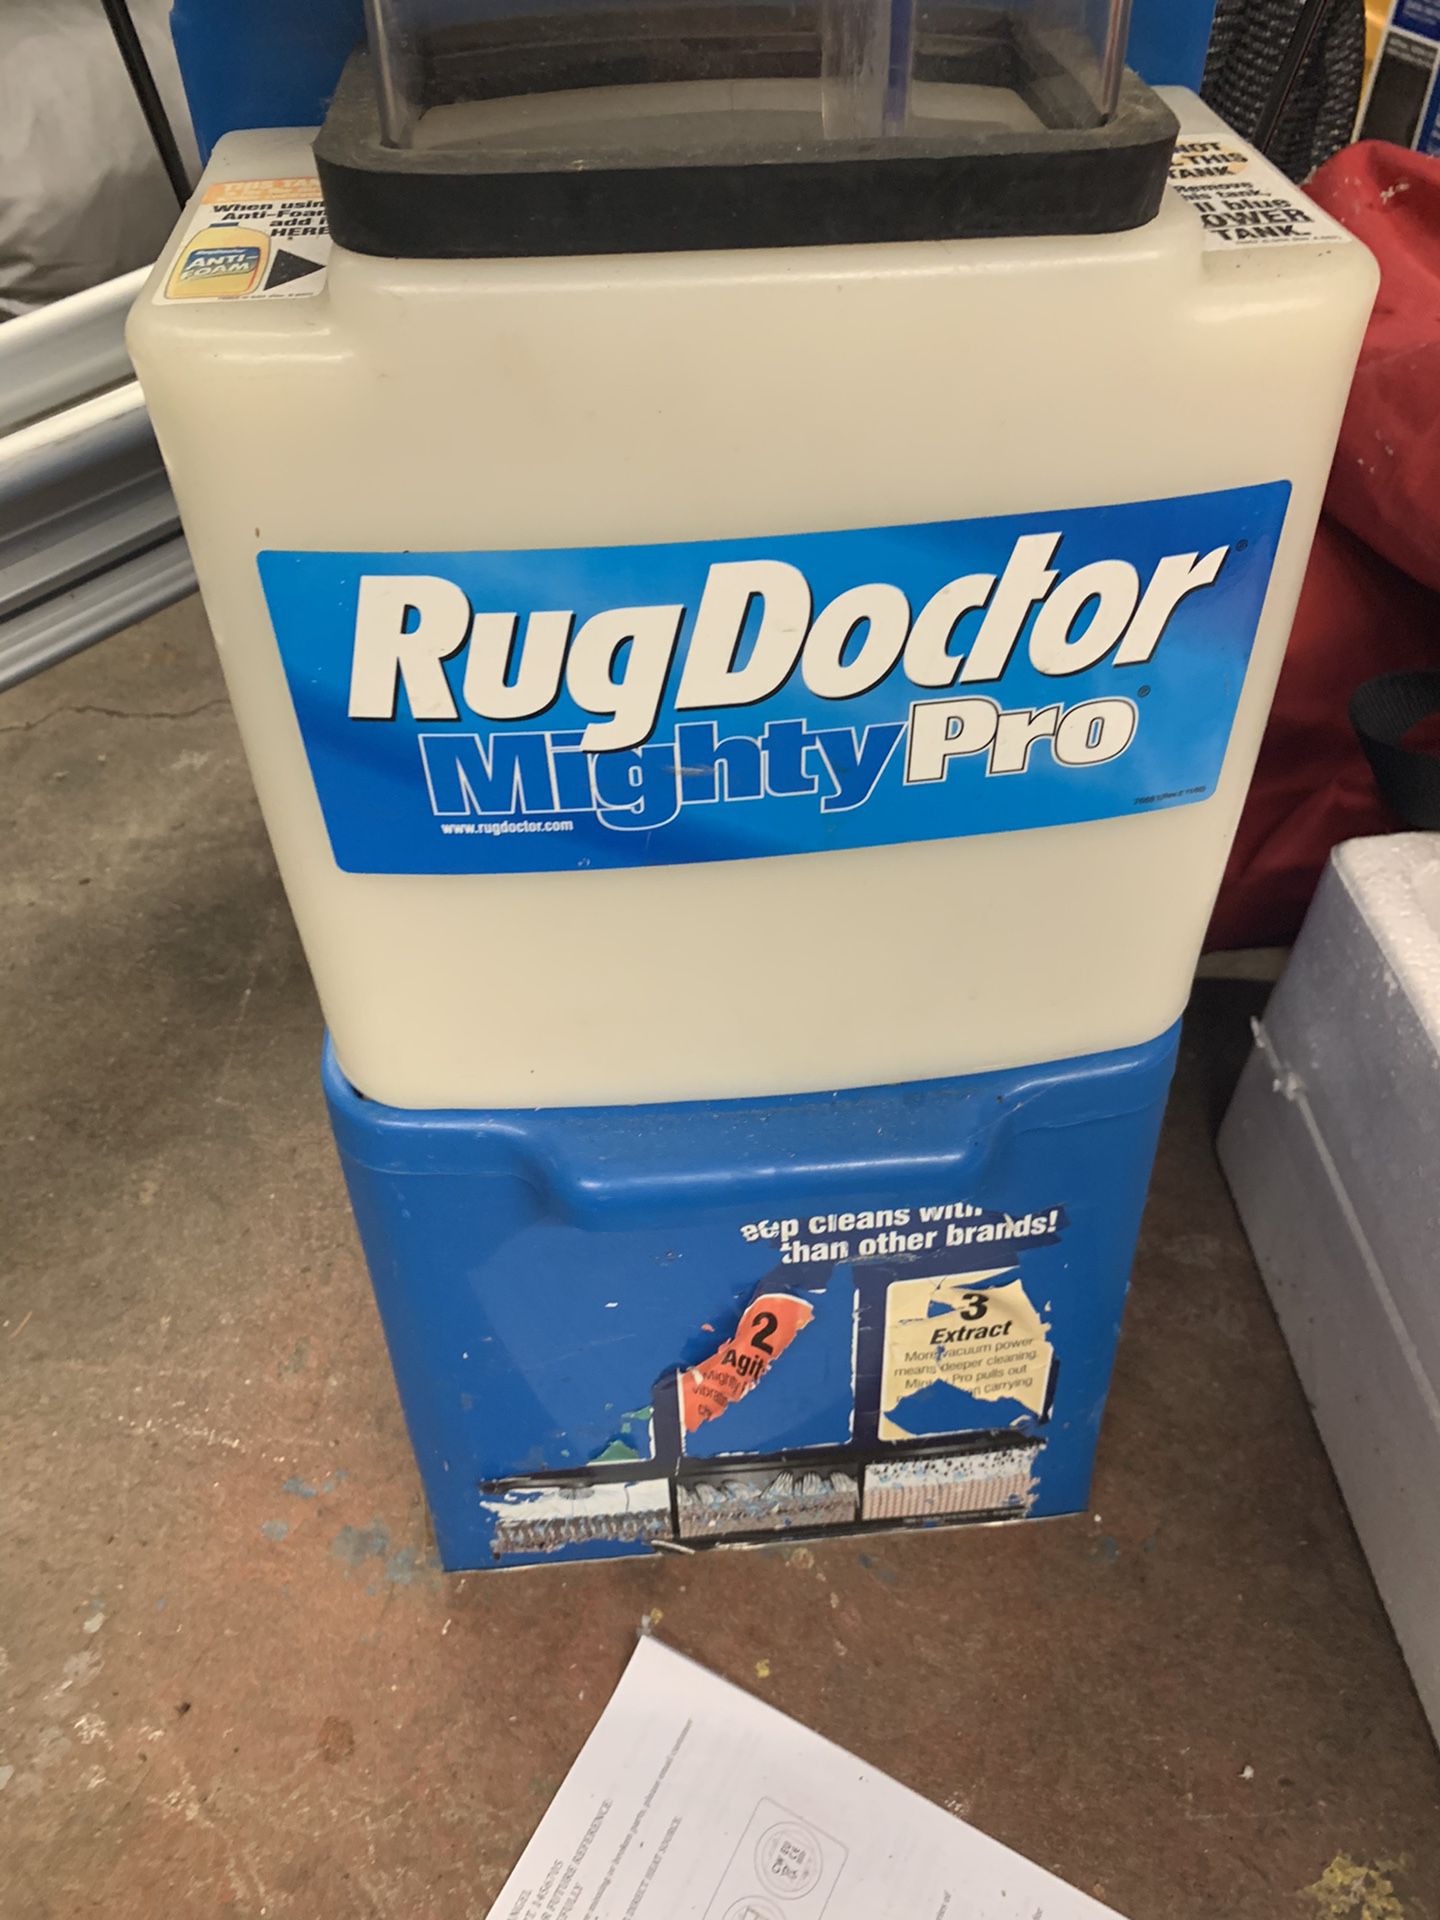 Rug doctor might pro